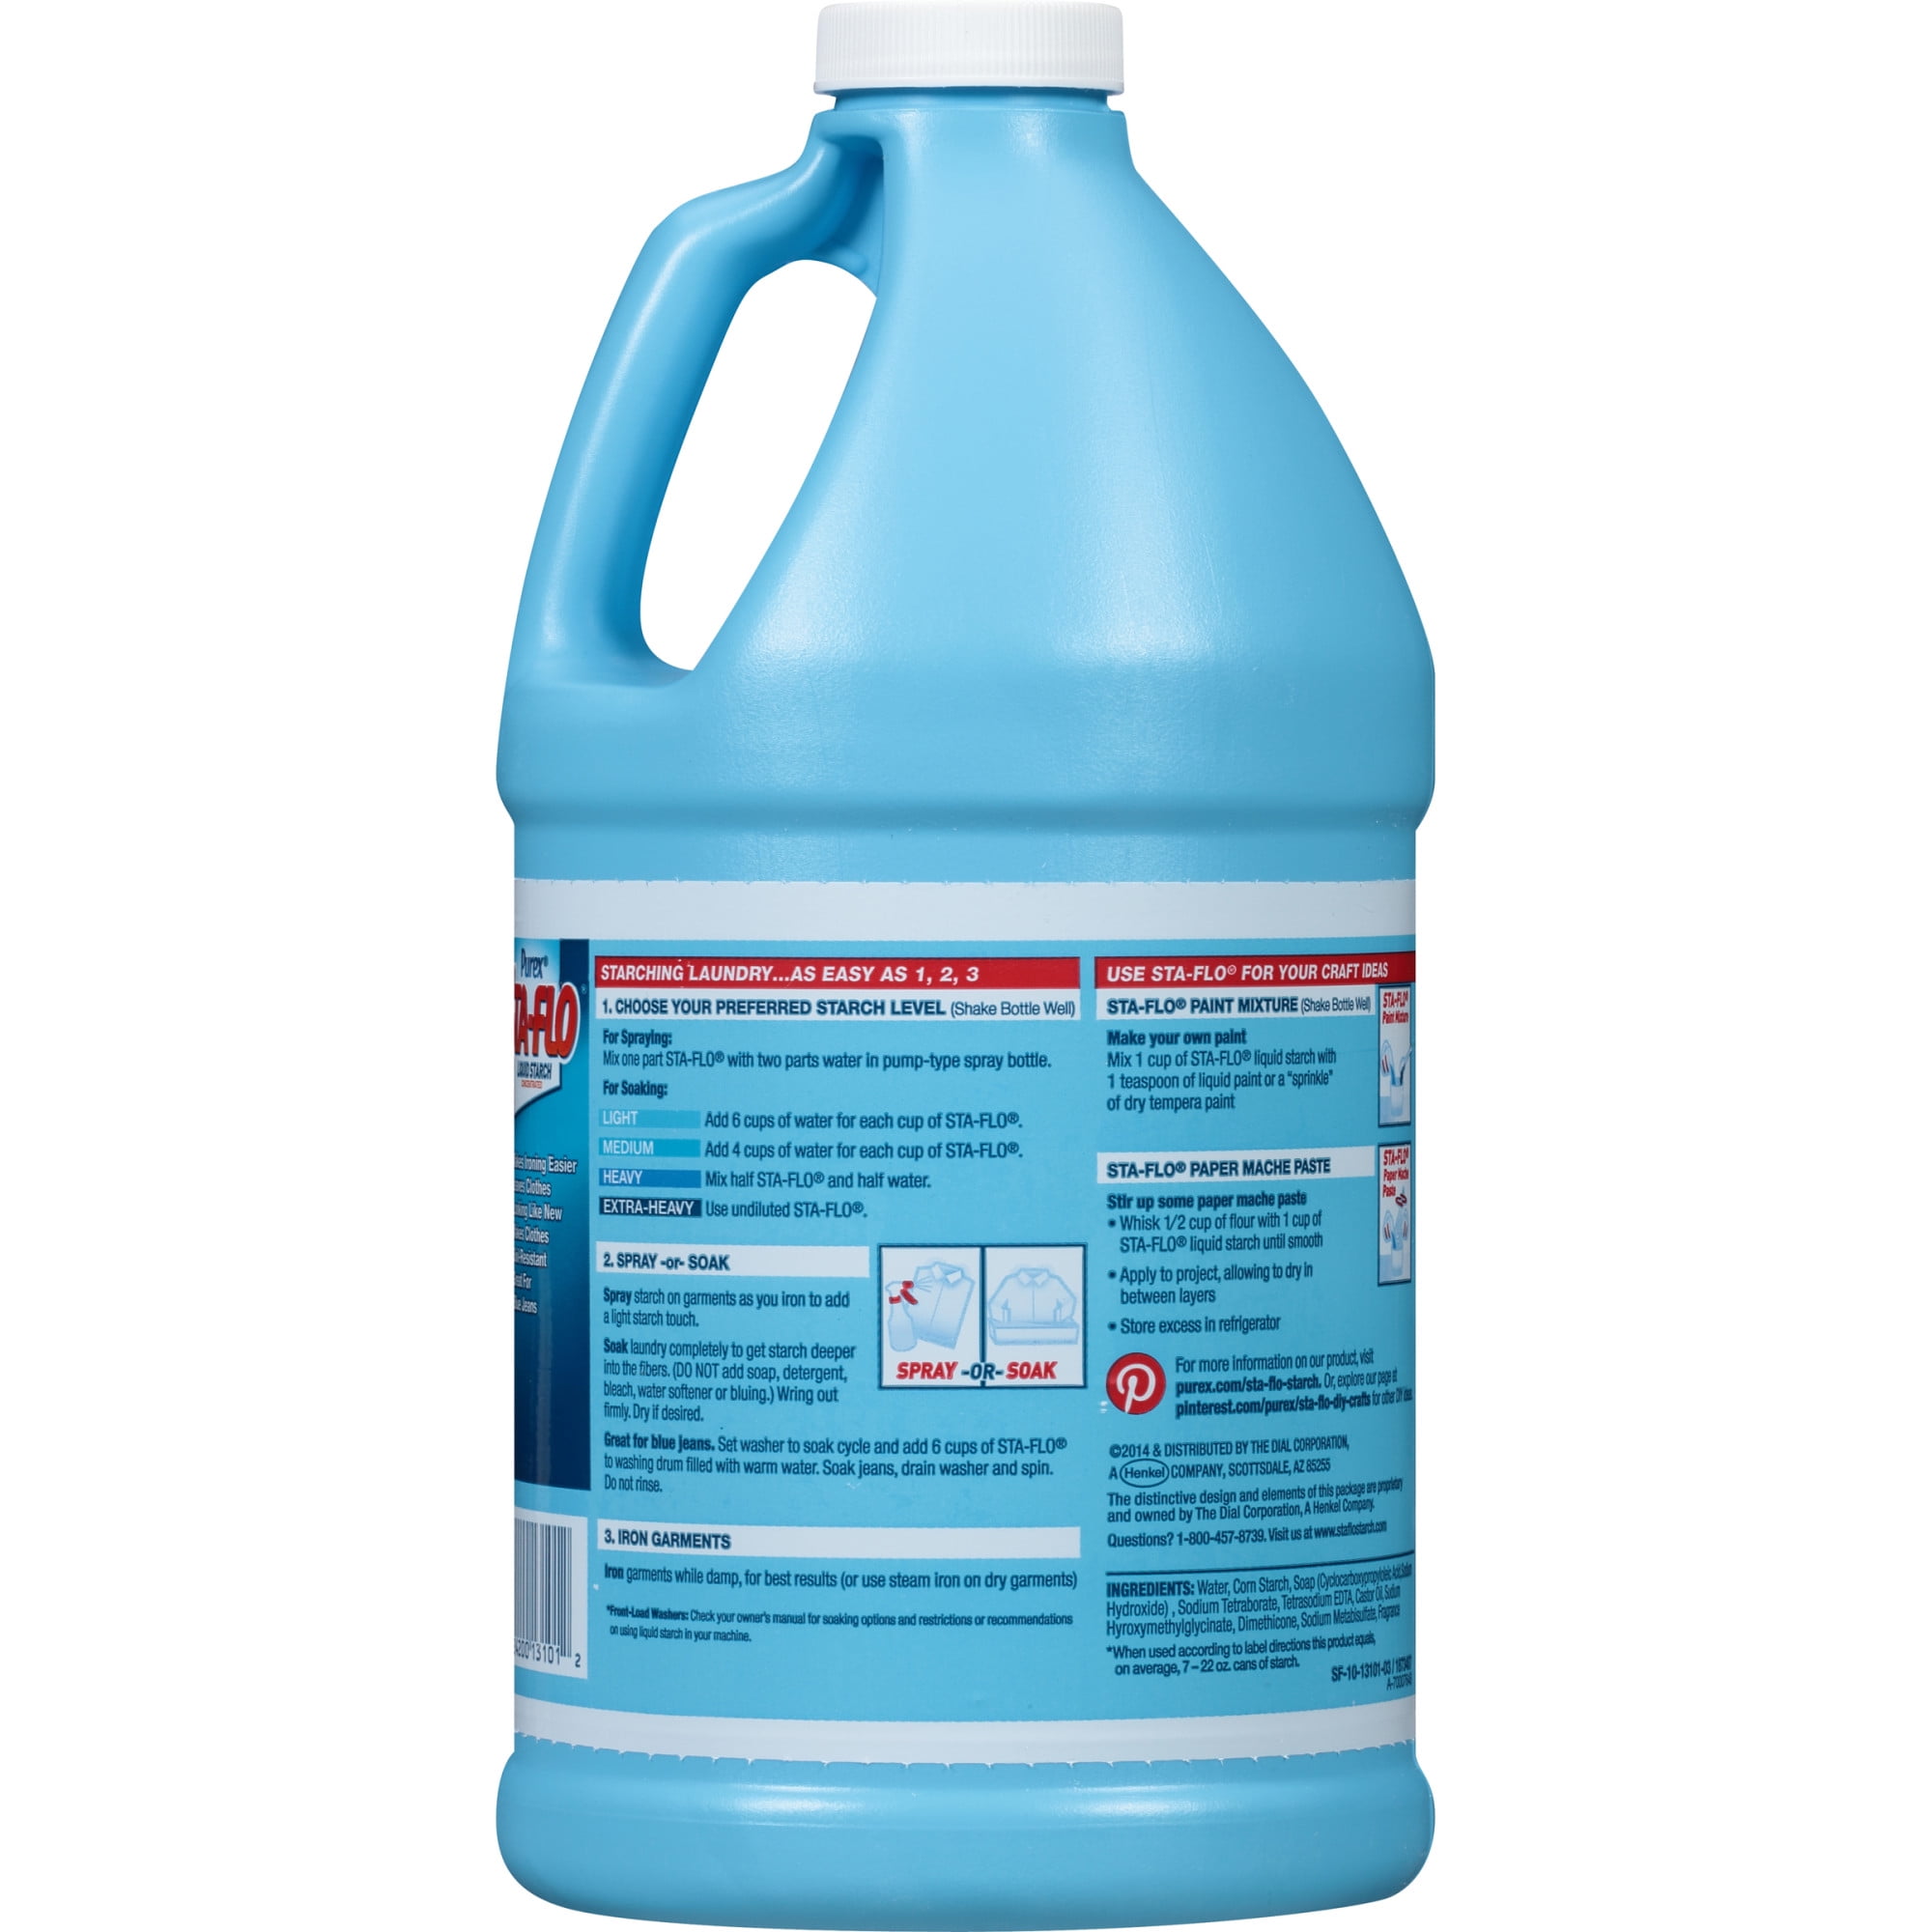 Find more New Sta-flo Concentrated Liquid Starch, 64 Fl Oz for